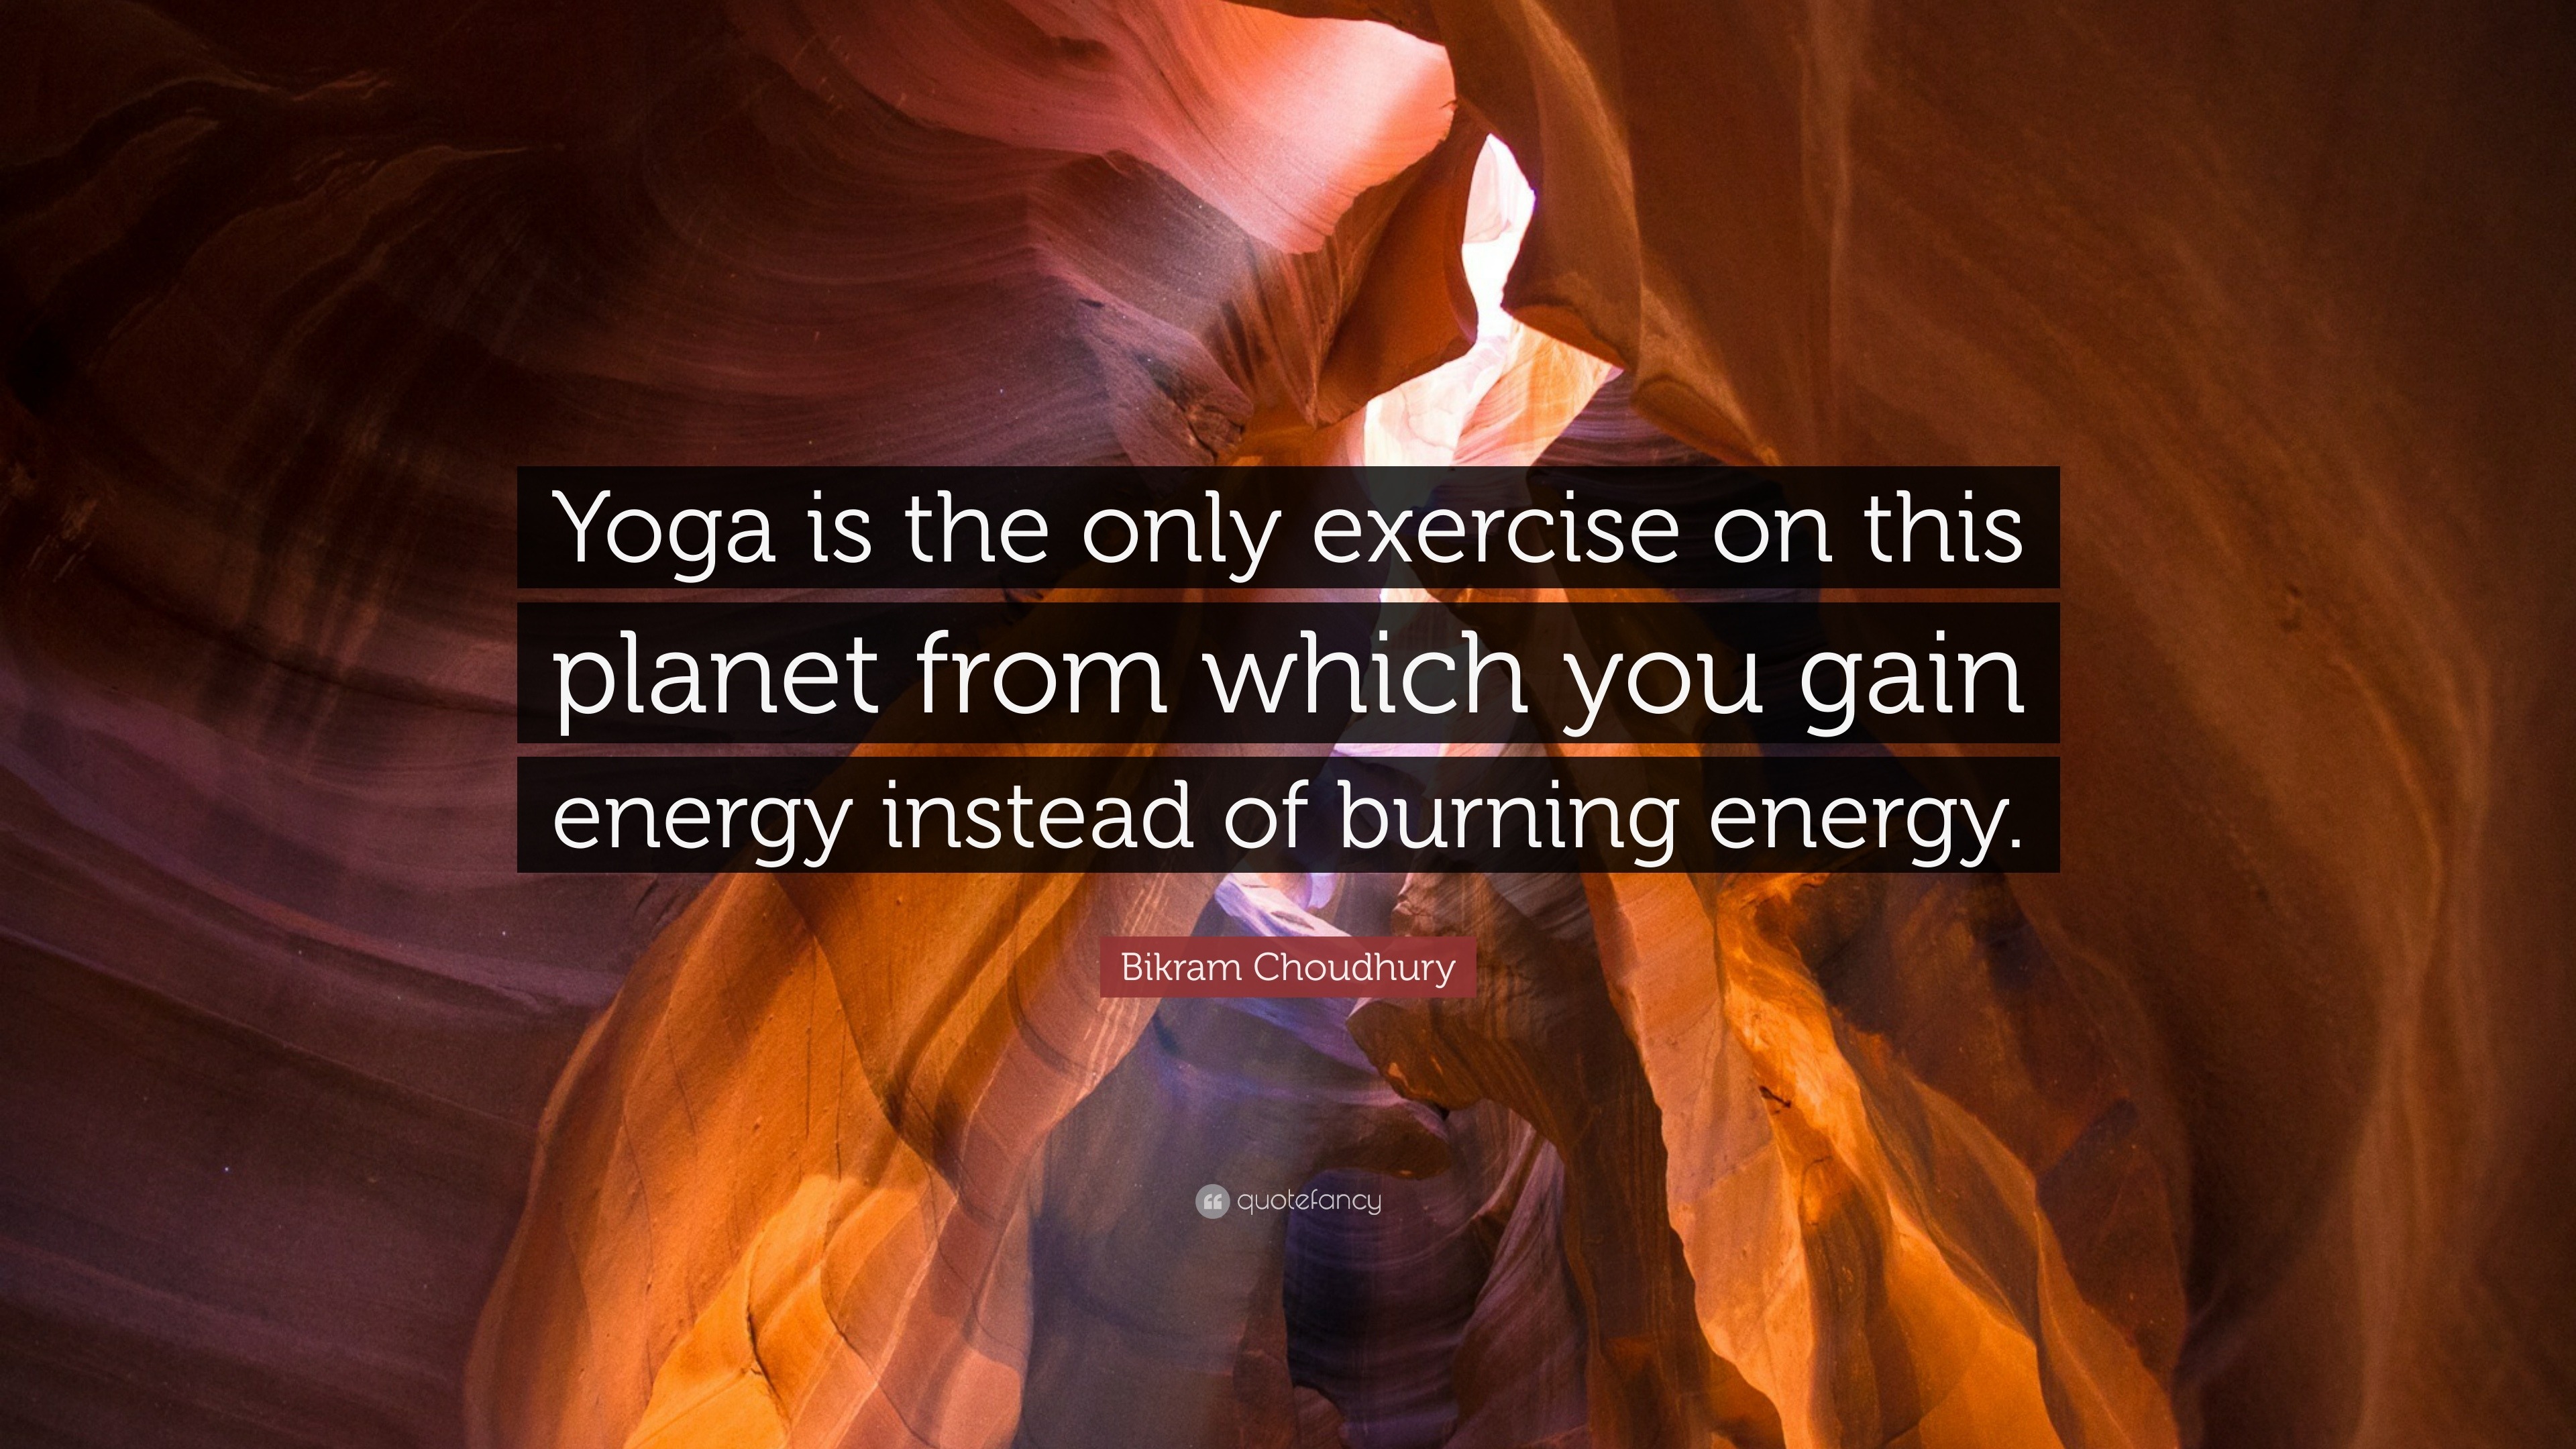 Bikram Choudhury Quote: “Yoga is the only exercise on this planet